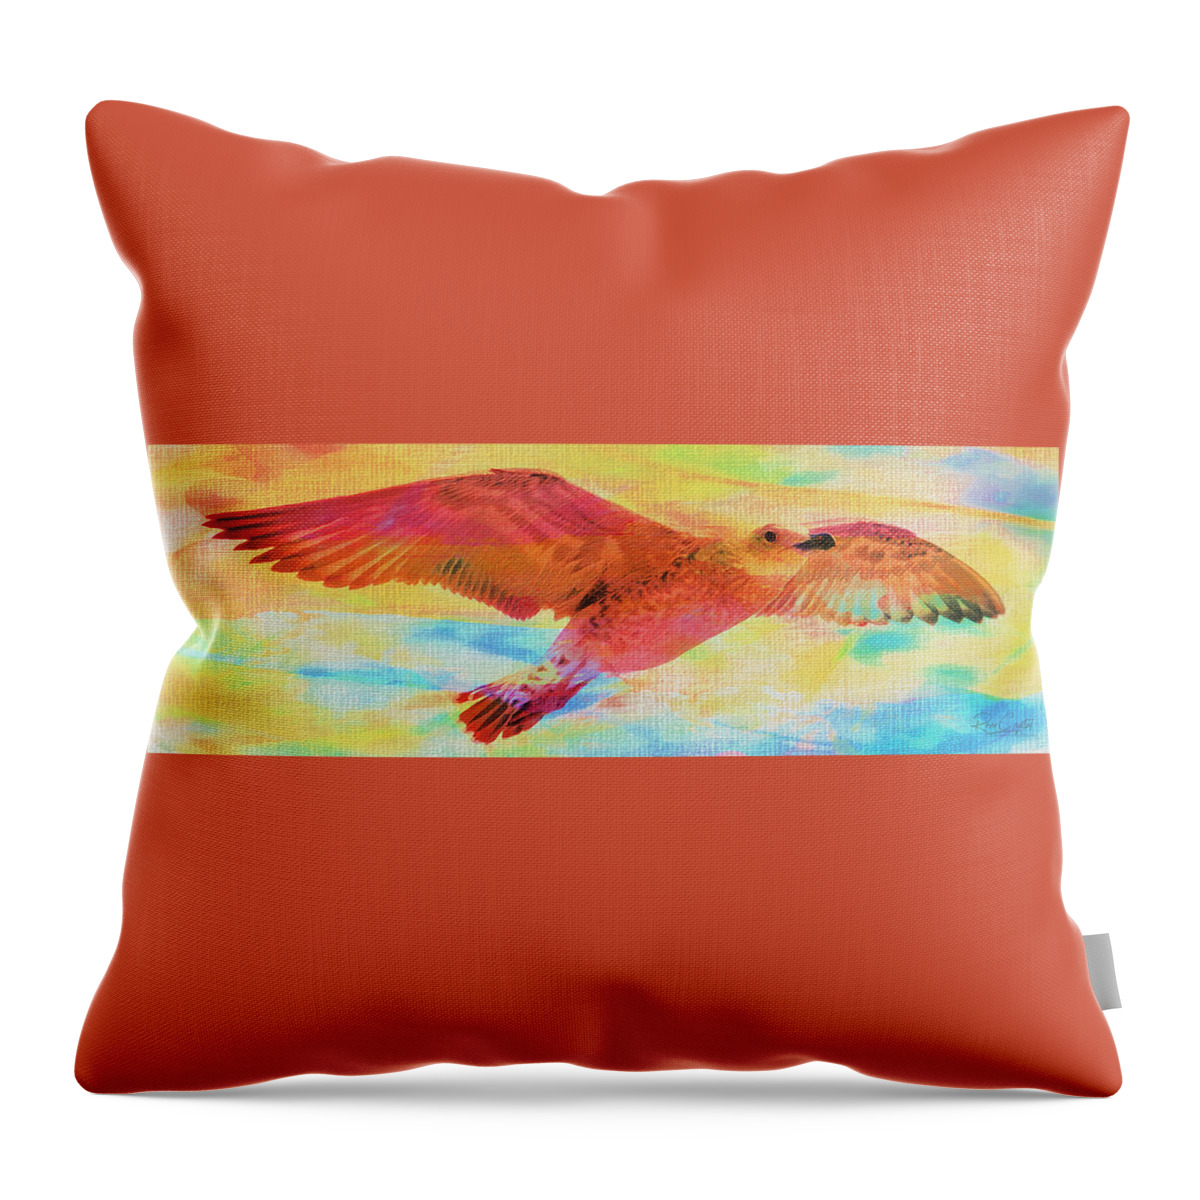 Seagulls Throw Pillow featuring the photograph A Seagull Of Another Color by Rene Crystal